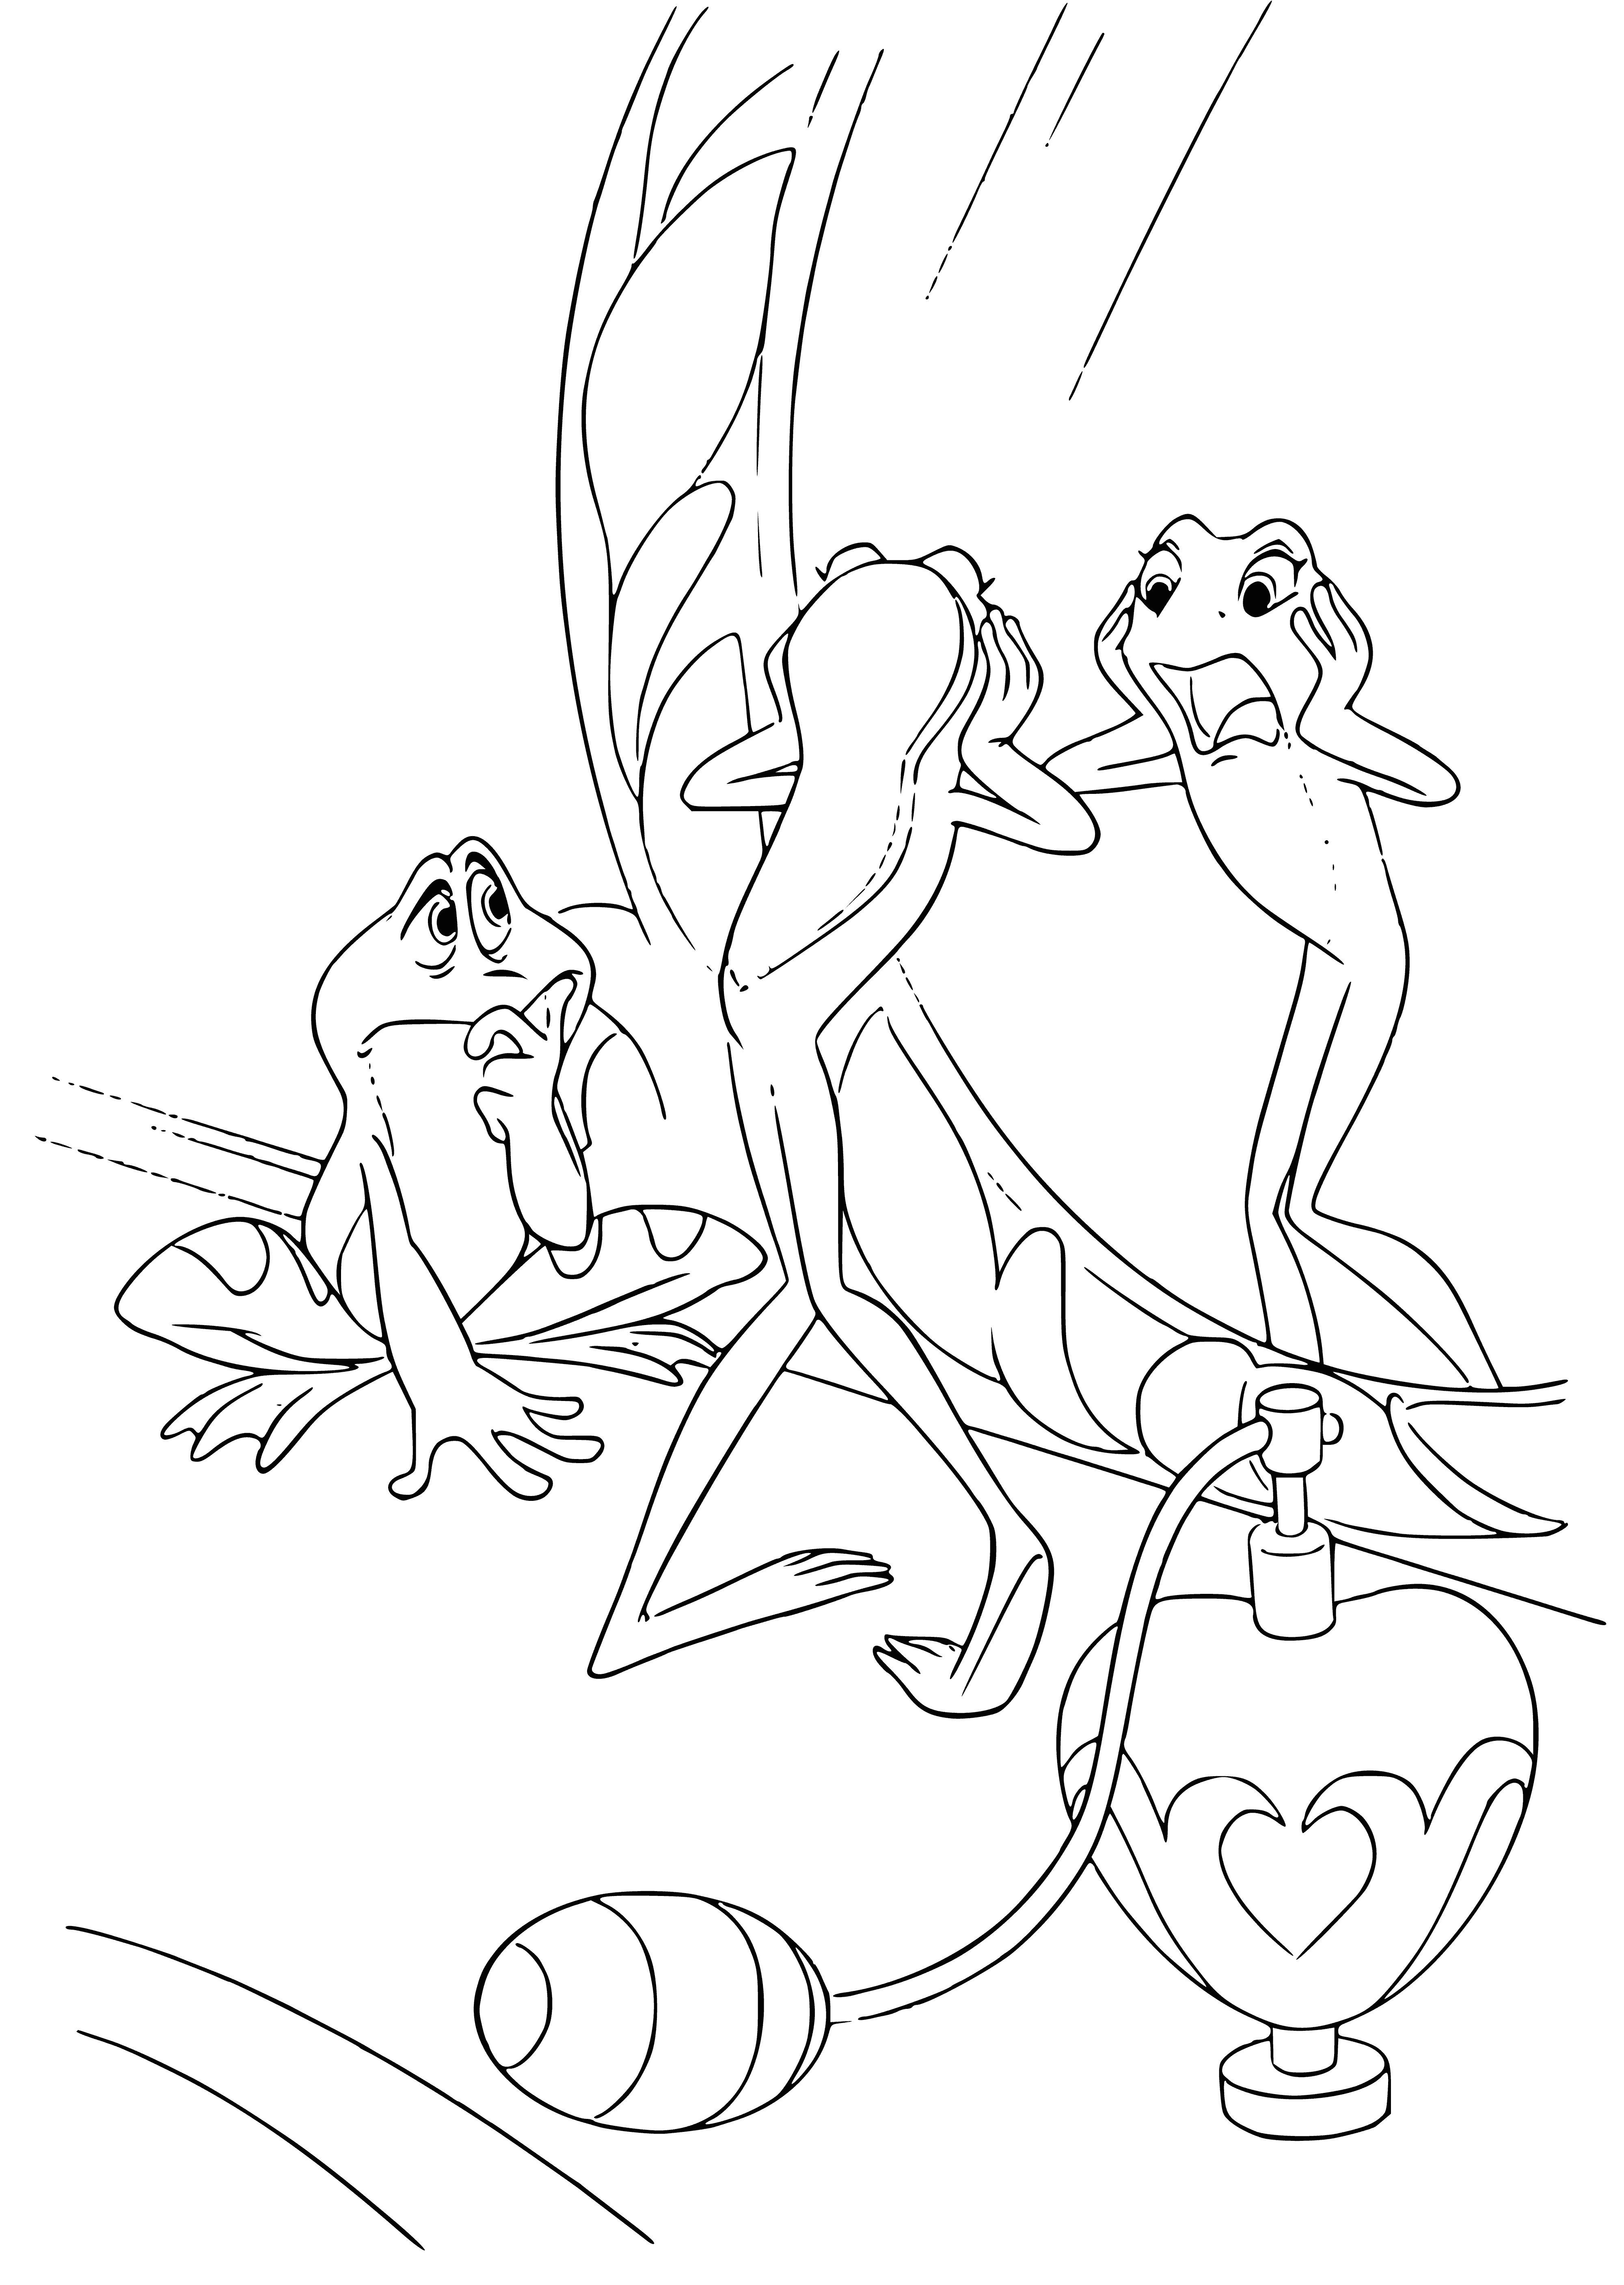 coloring page: Tiana is a frog, worried and on a lily pad surrounded by other frogs.